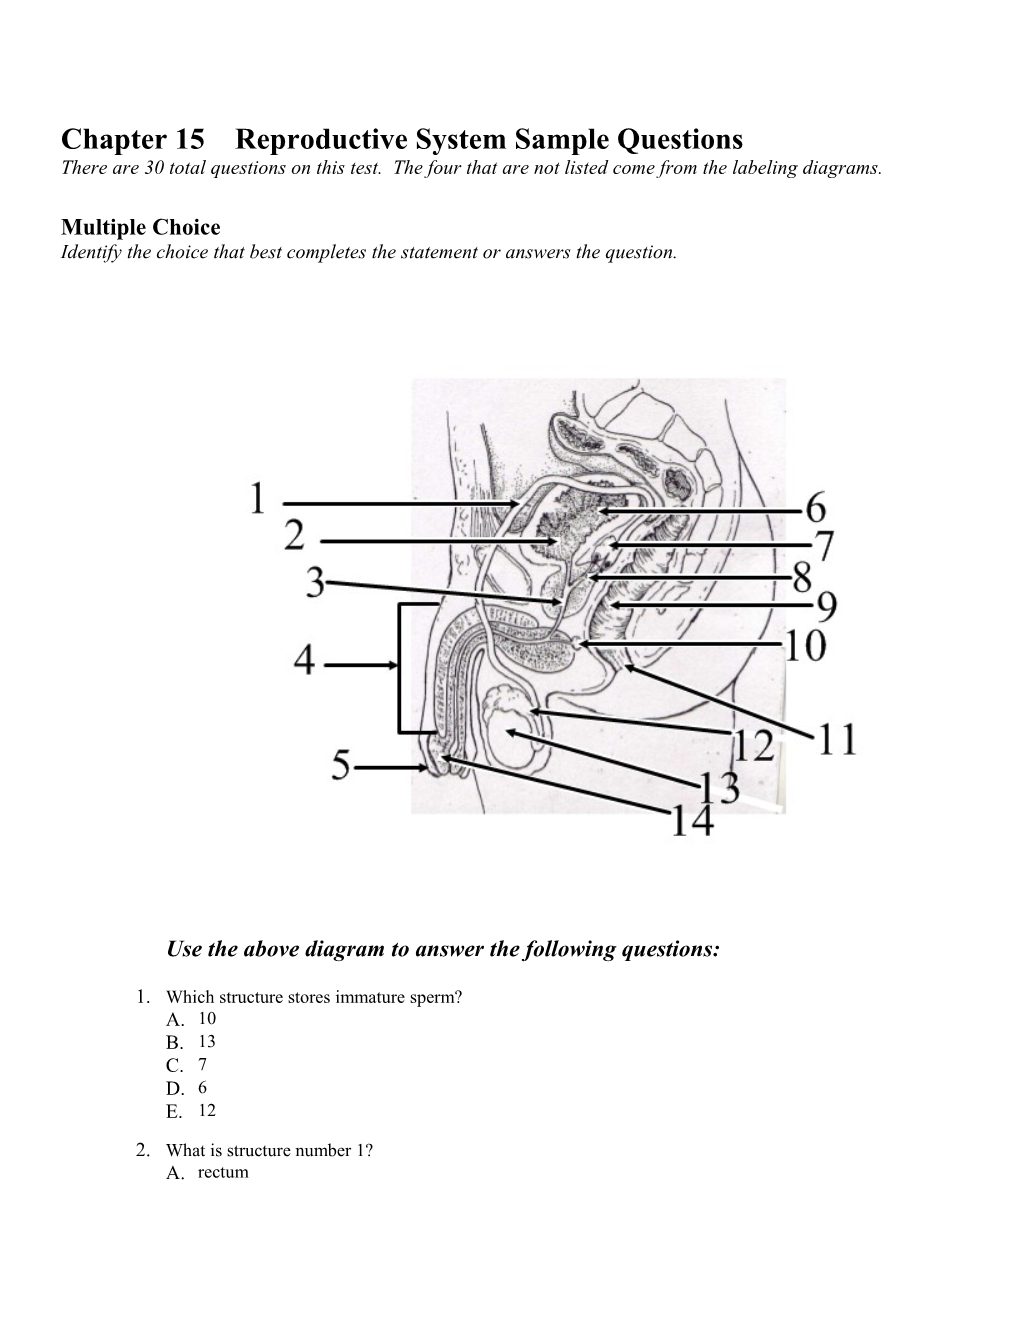 Chapter 15 Reproductive System Sample Questions